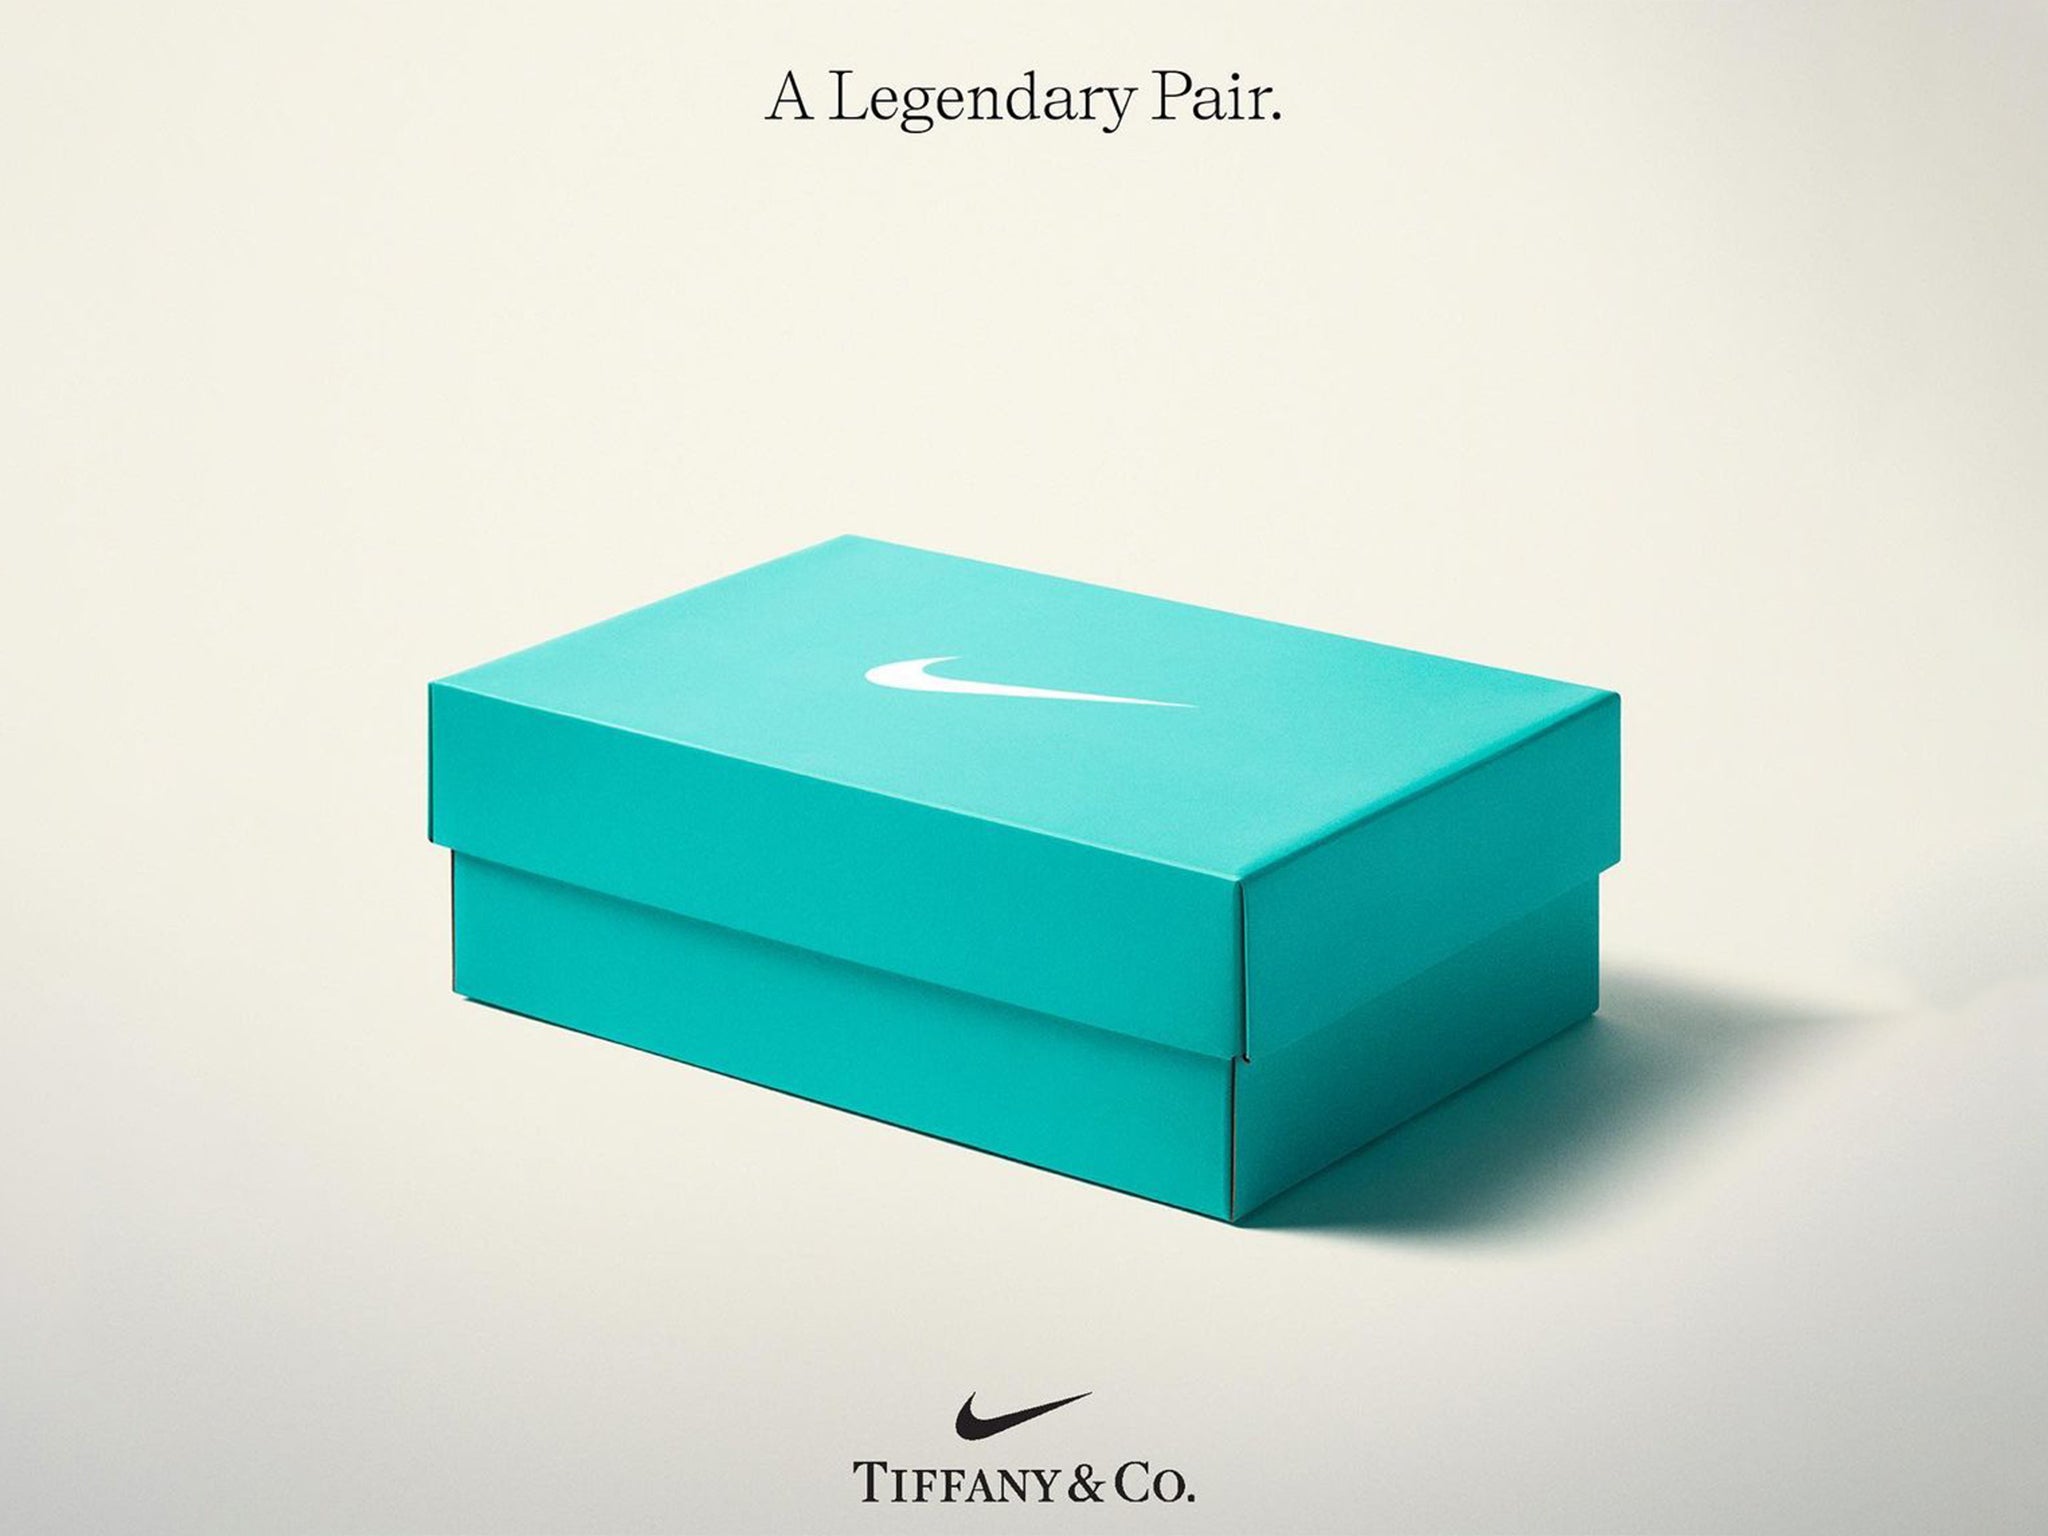 Nike's Tiffany collaboration sparks mockery from fans | The ...